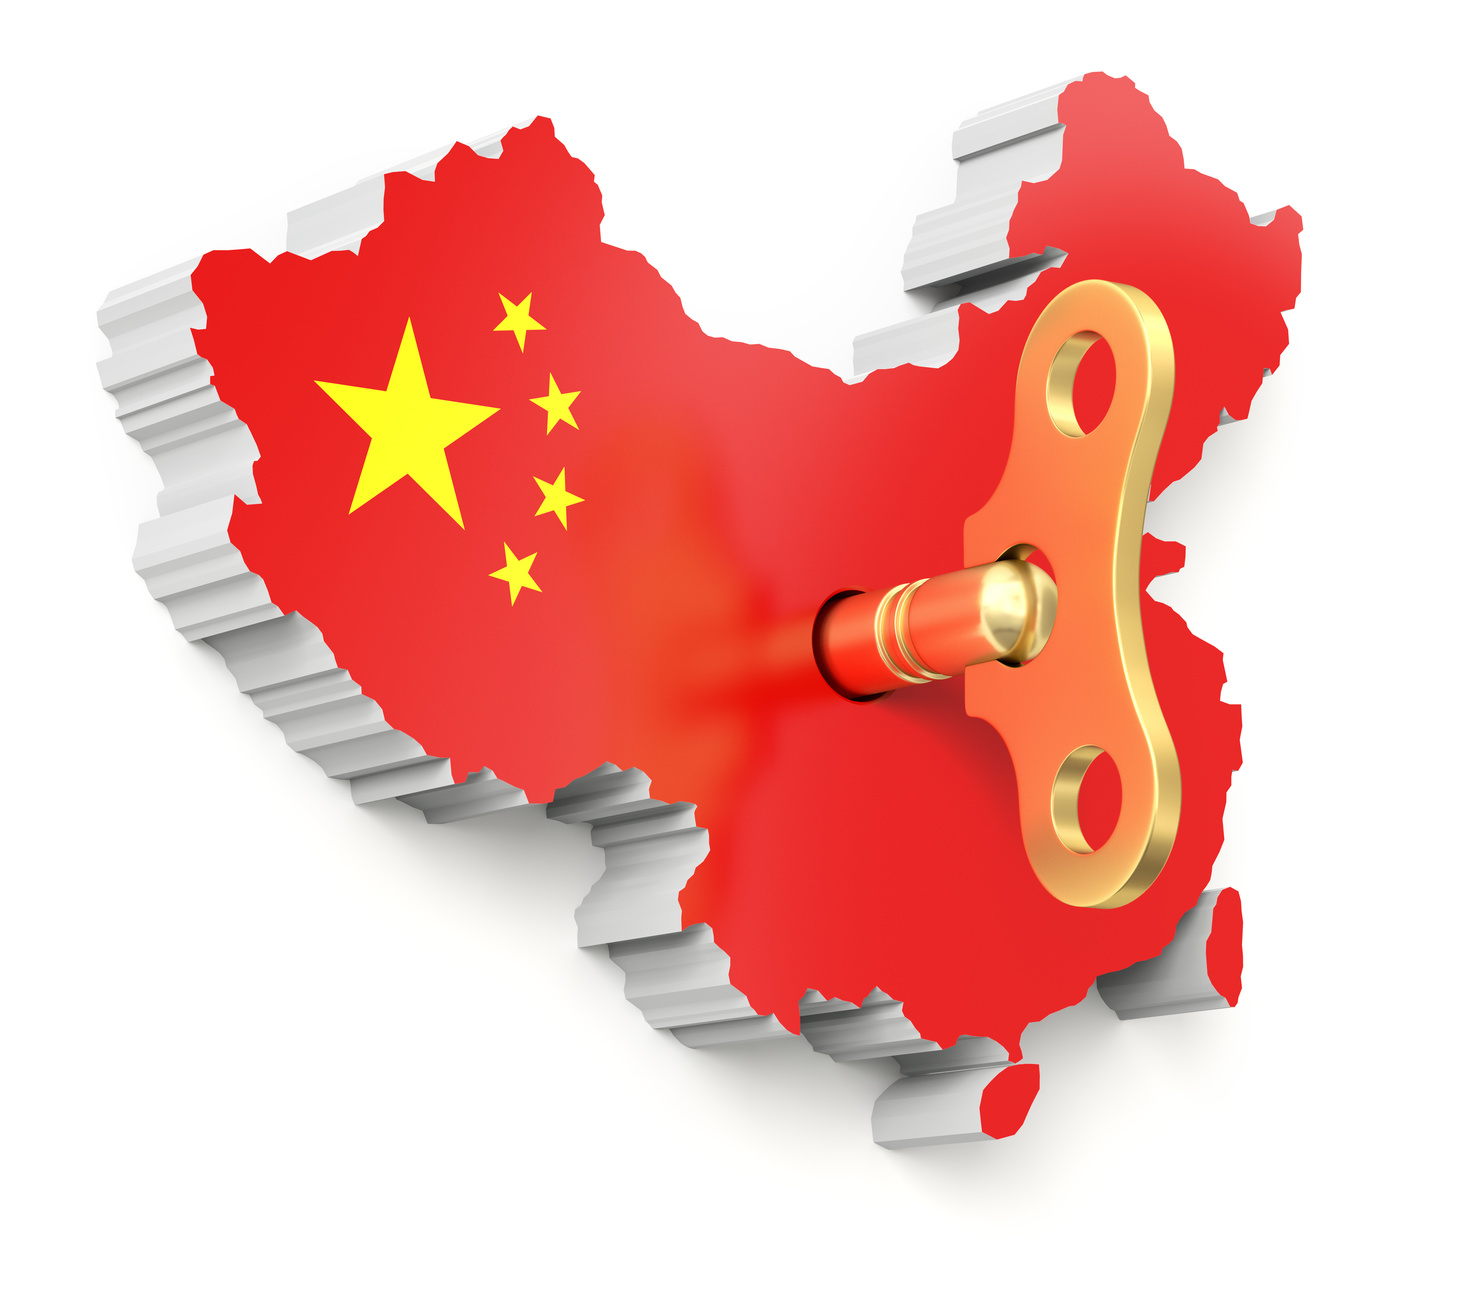 Map of China with a key